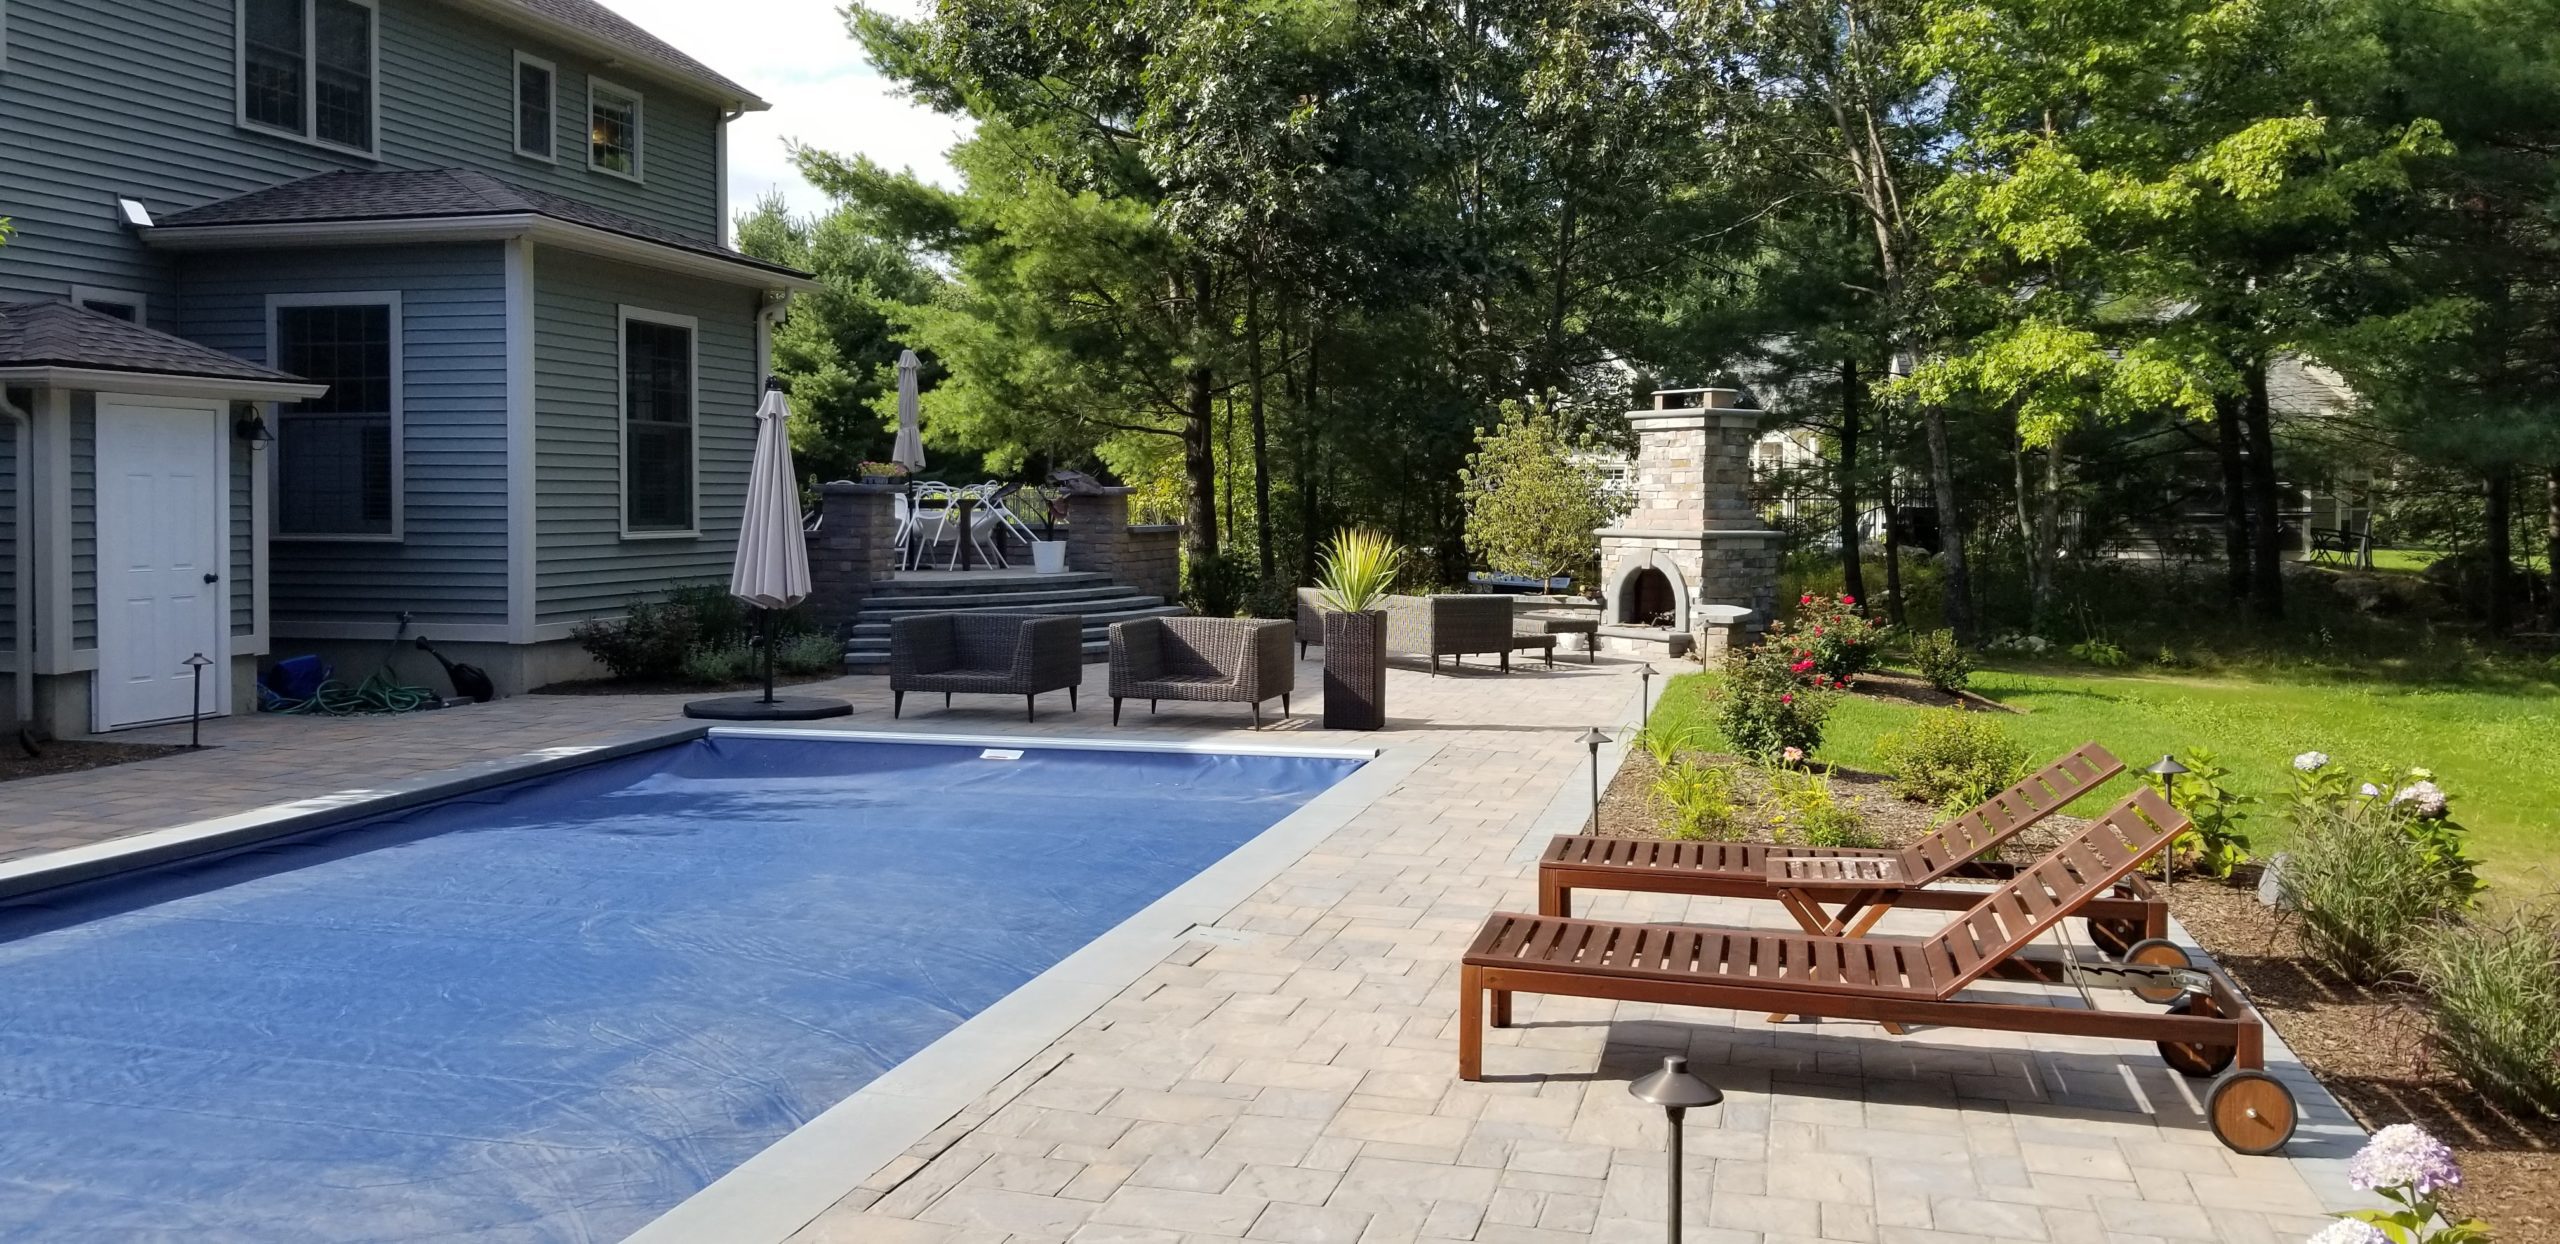 Florence, MA Landscaping Services